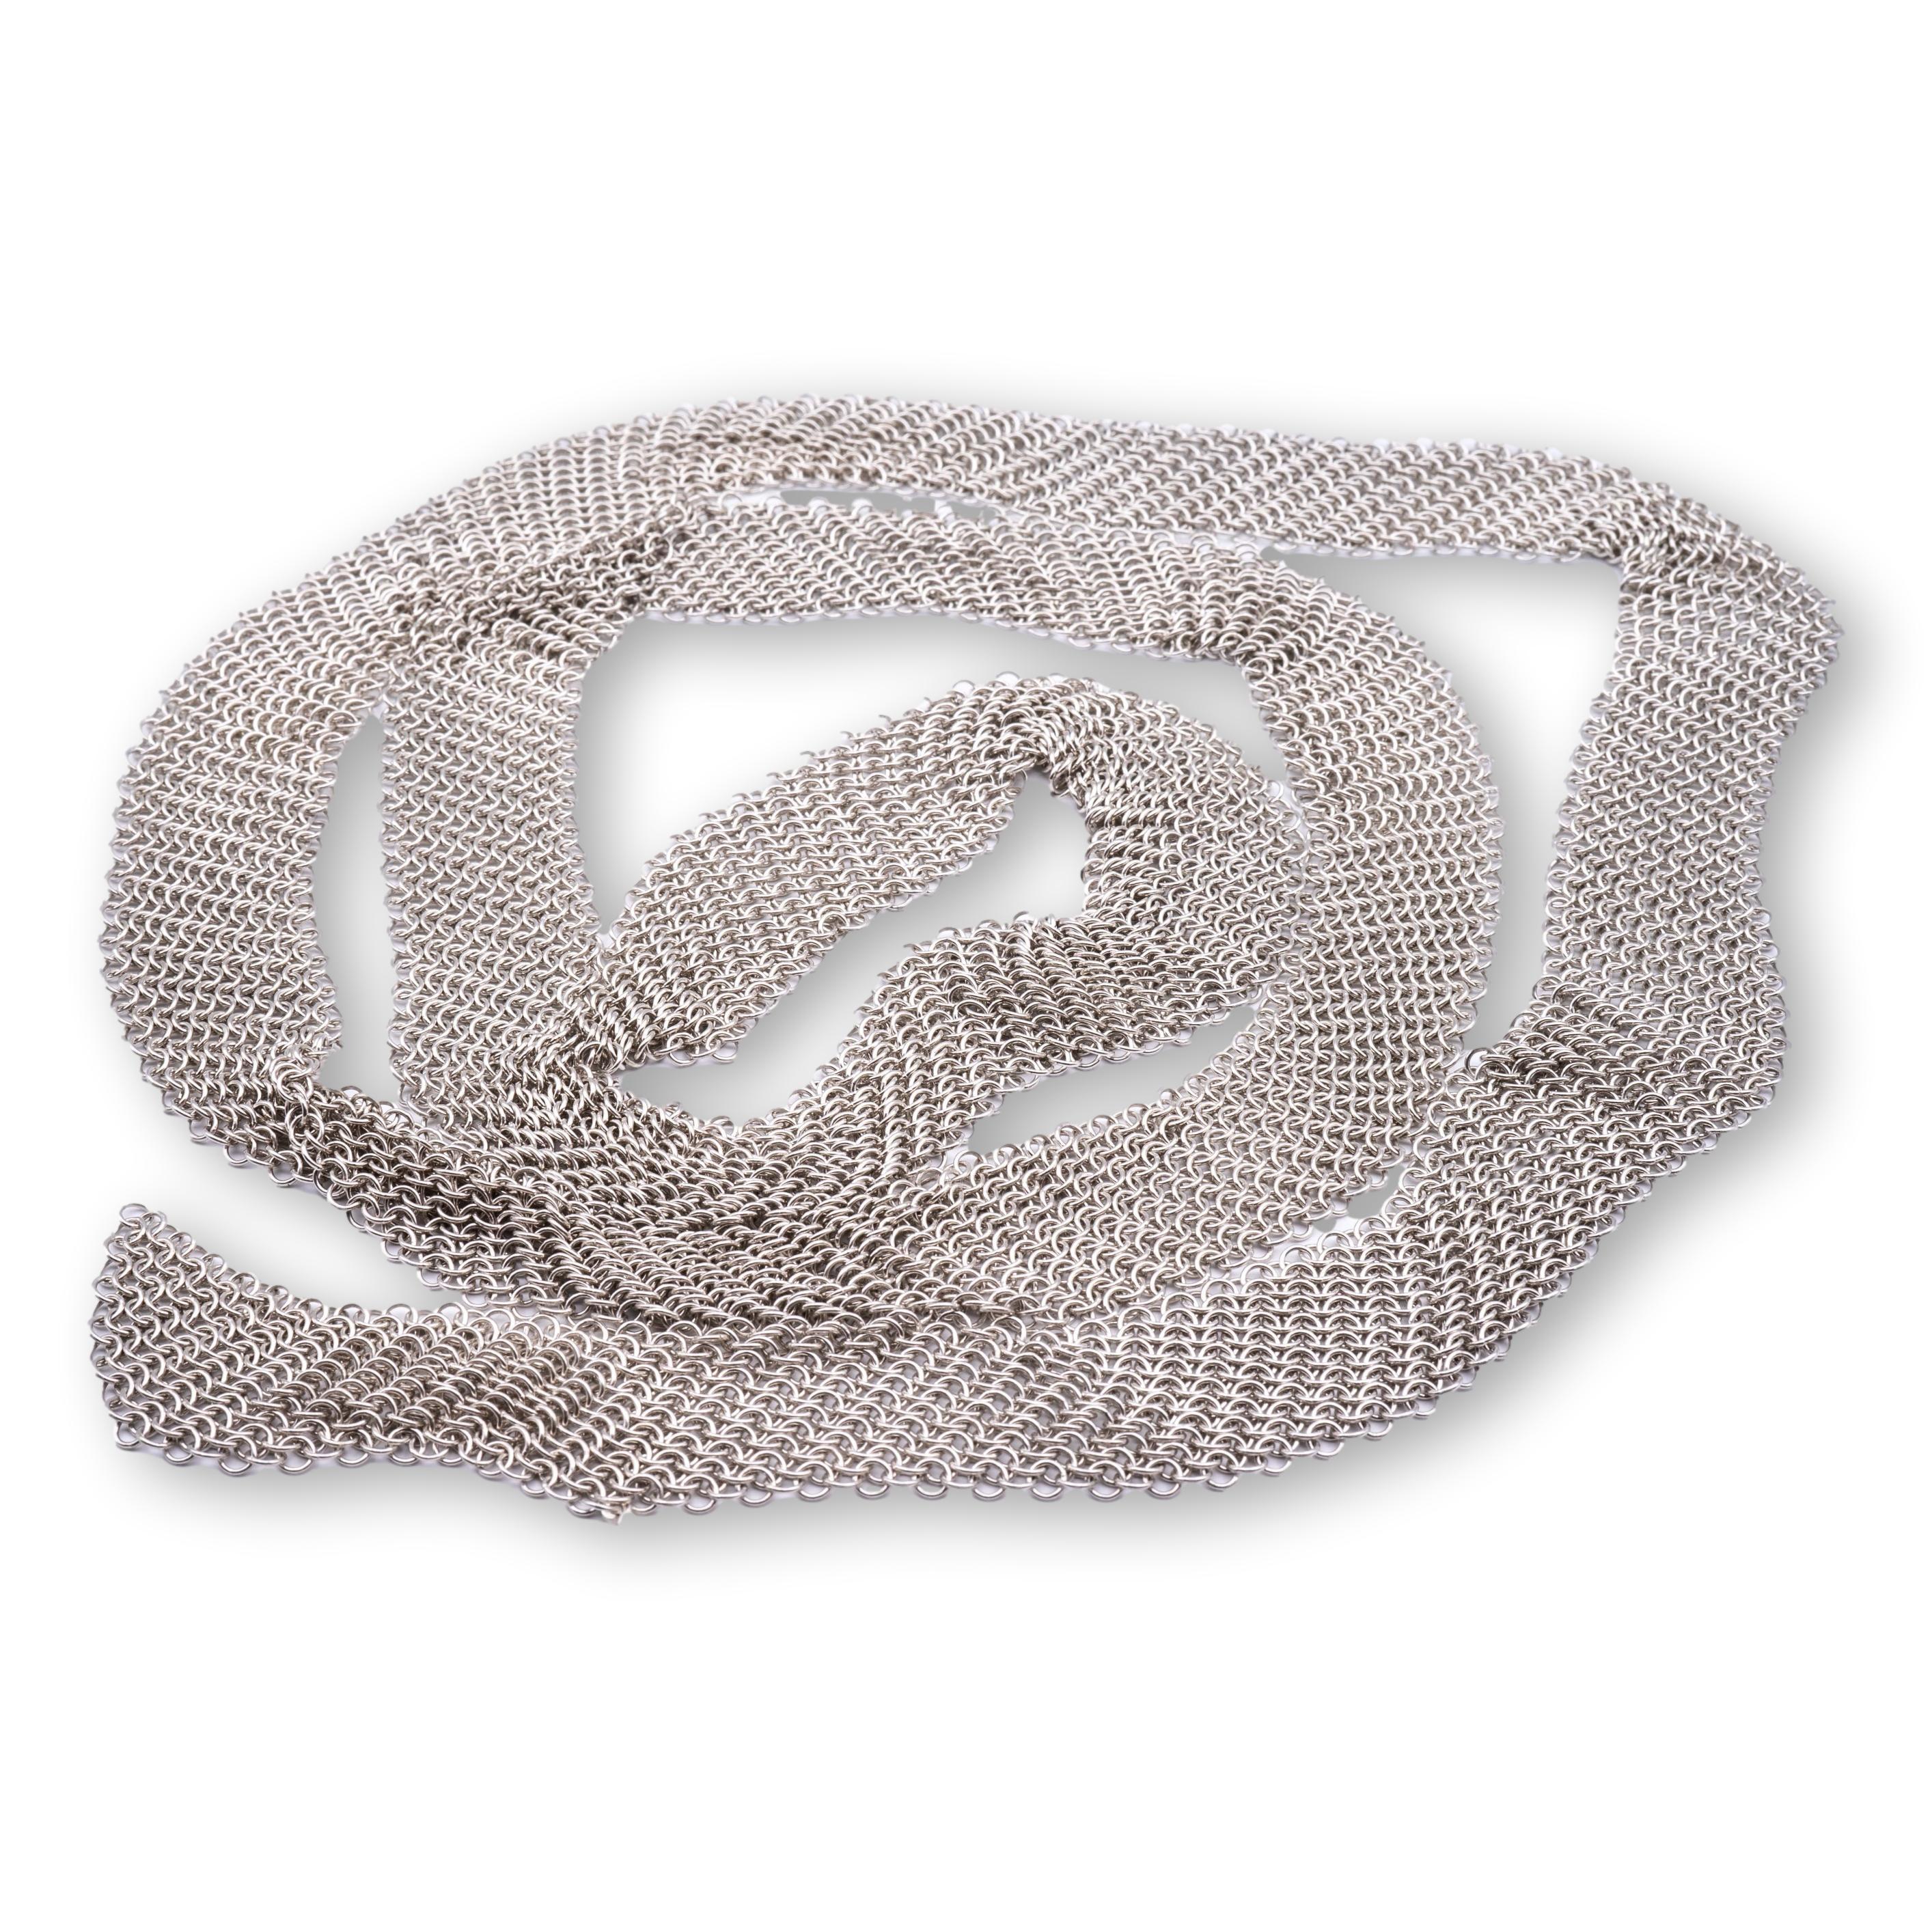 Tiffany & Co. Mesh Tie Scarf / Necklace from the Elsa Peretti Collection finely crafted in sterling silver with a woven mesh chain link design throughout , measuring 49